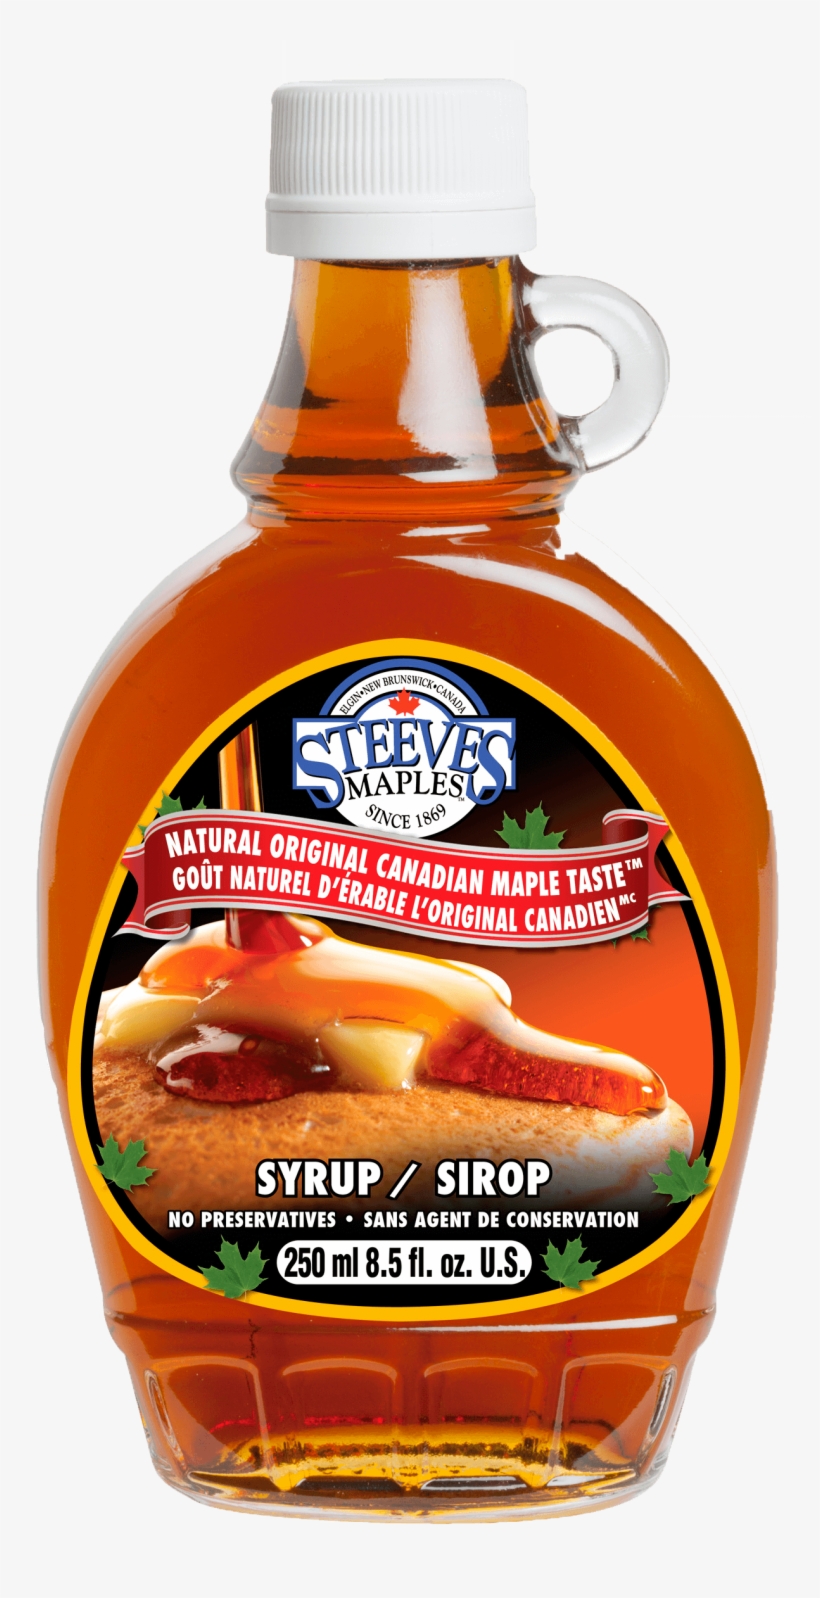 Of Maple Flavoured Products - Maple Syrup Companies Canada, transparent png #1537826